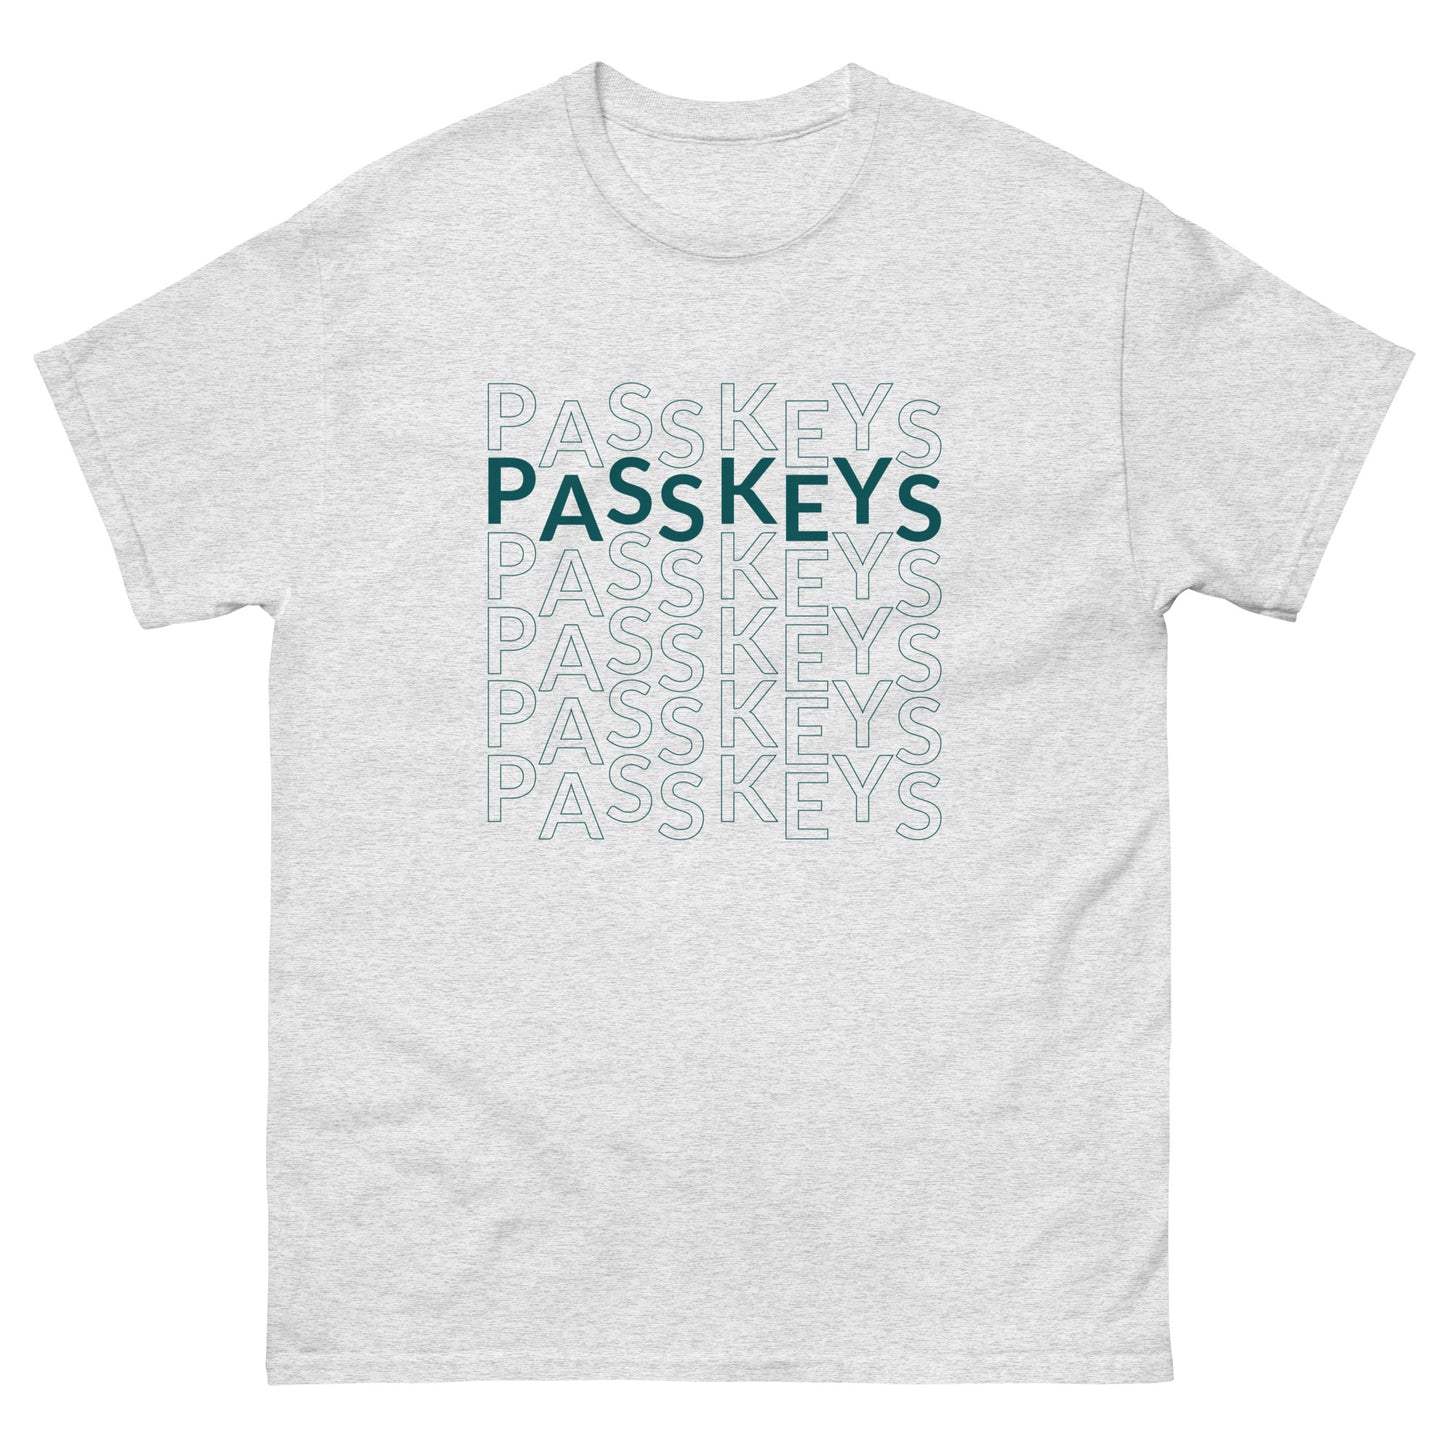 Passkeys on Repeat - Classic Fit Tee